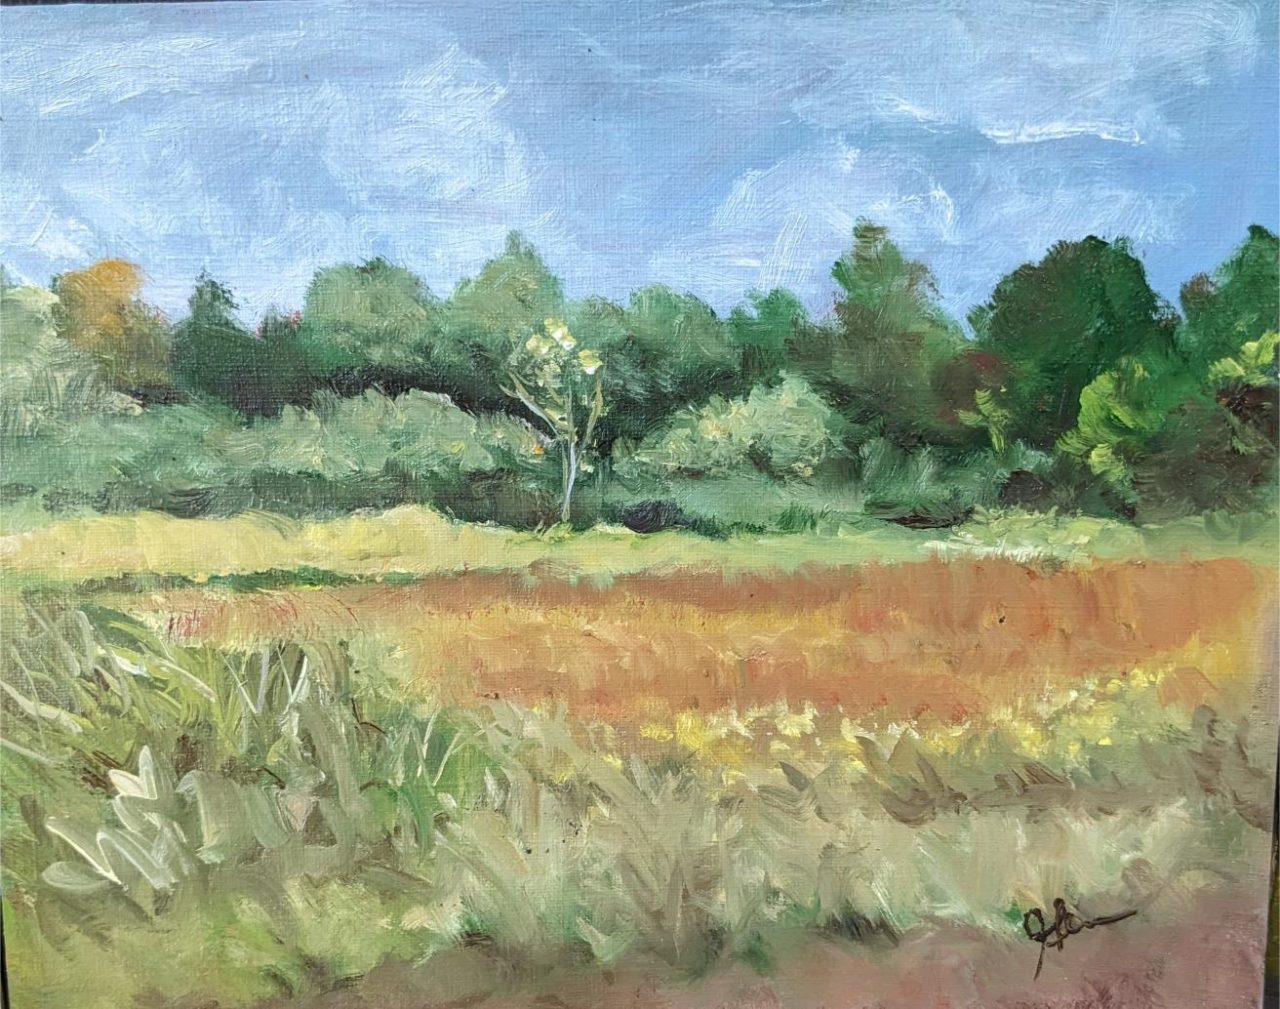 A painting of a field with grass and trees behind it by Jared Clackner for the Karl Stirner Arts Trail Plein Air Painting Invitation sponsored by Vasari Classic Artists’ Oil Colors